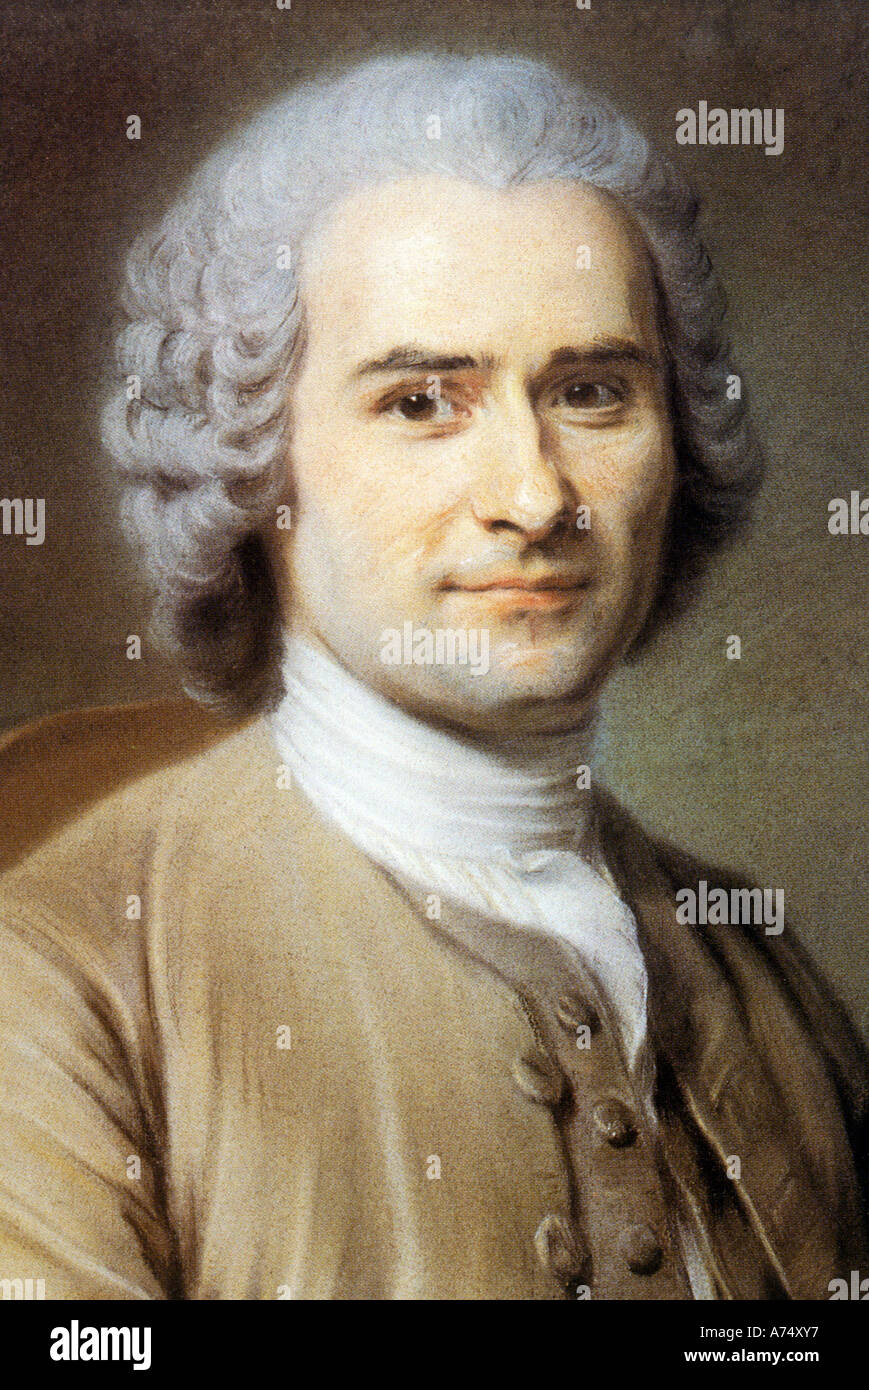 JEAN JACQUES ROUSSEAU 1712 to 1778 French political philosopher, educationalist and author Stock Photo